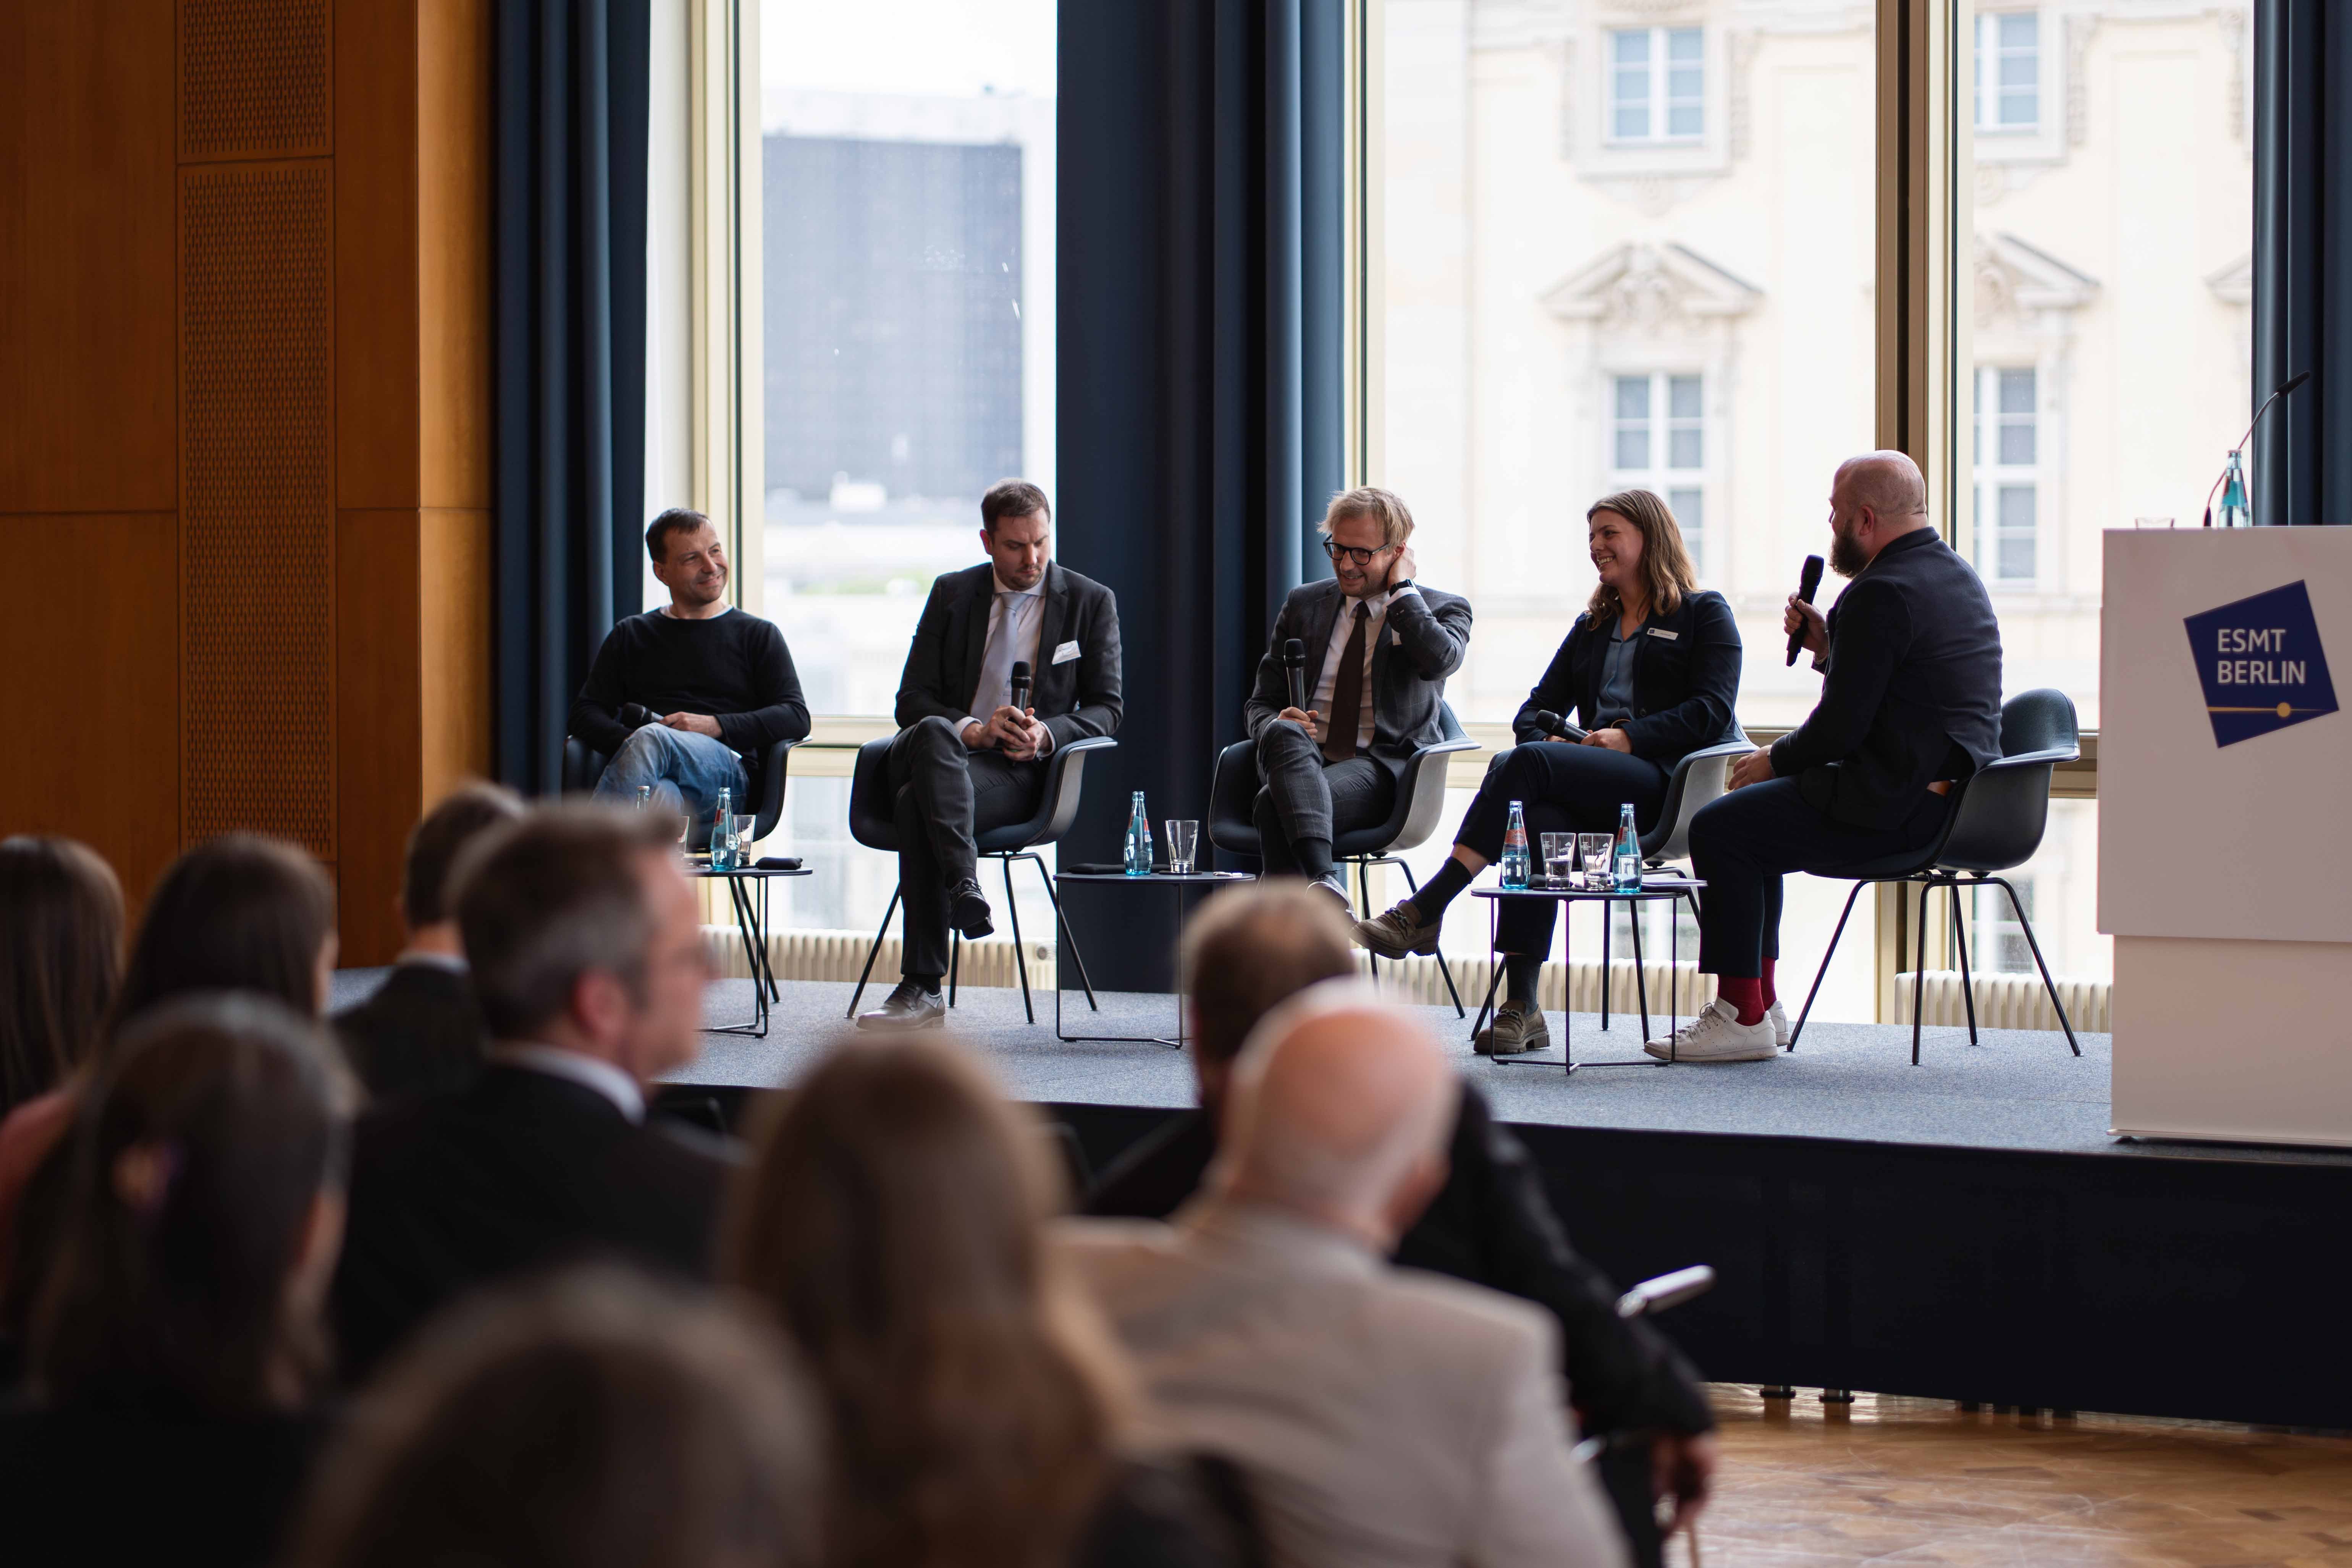 Panel discussion at the Digital Society Institute, ESMT Berlin